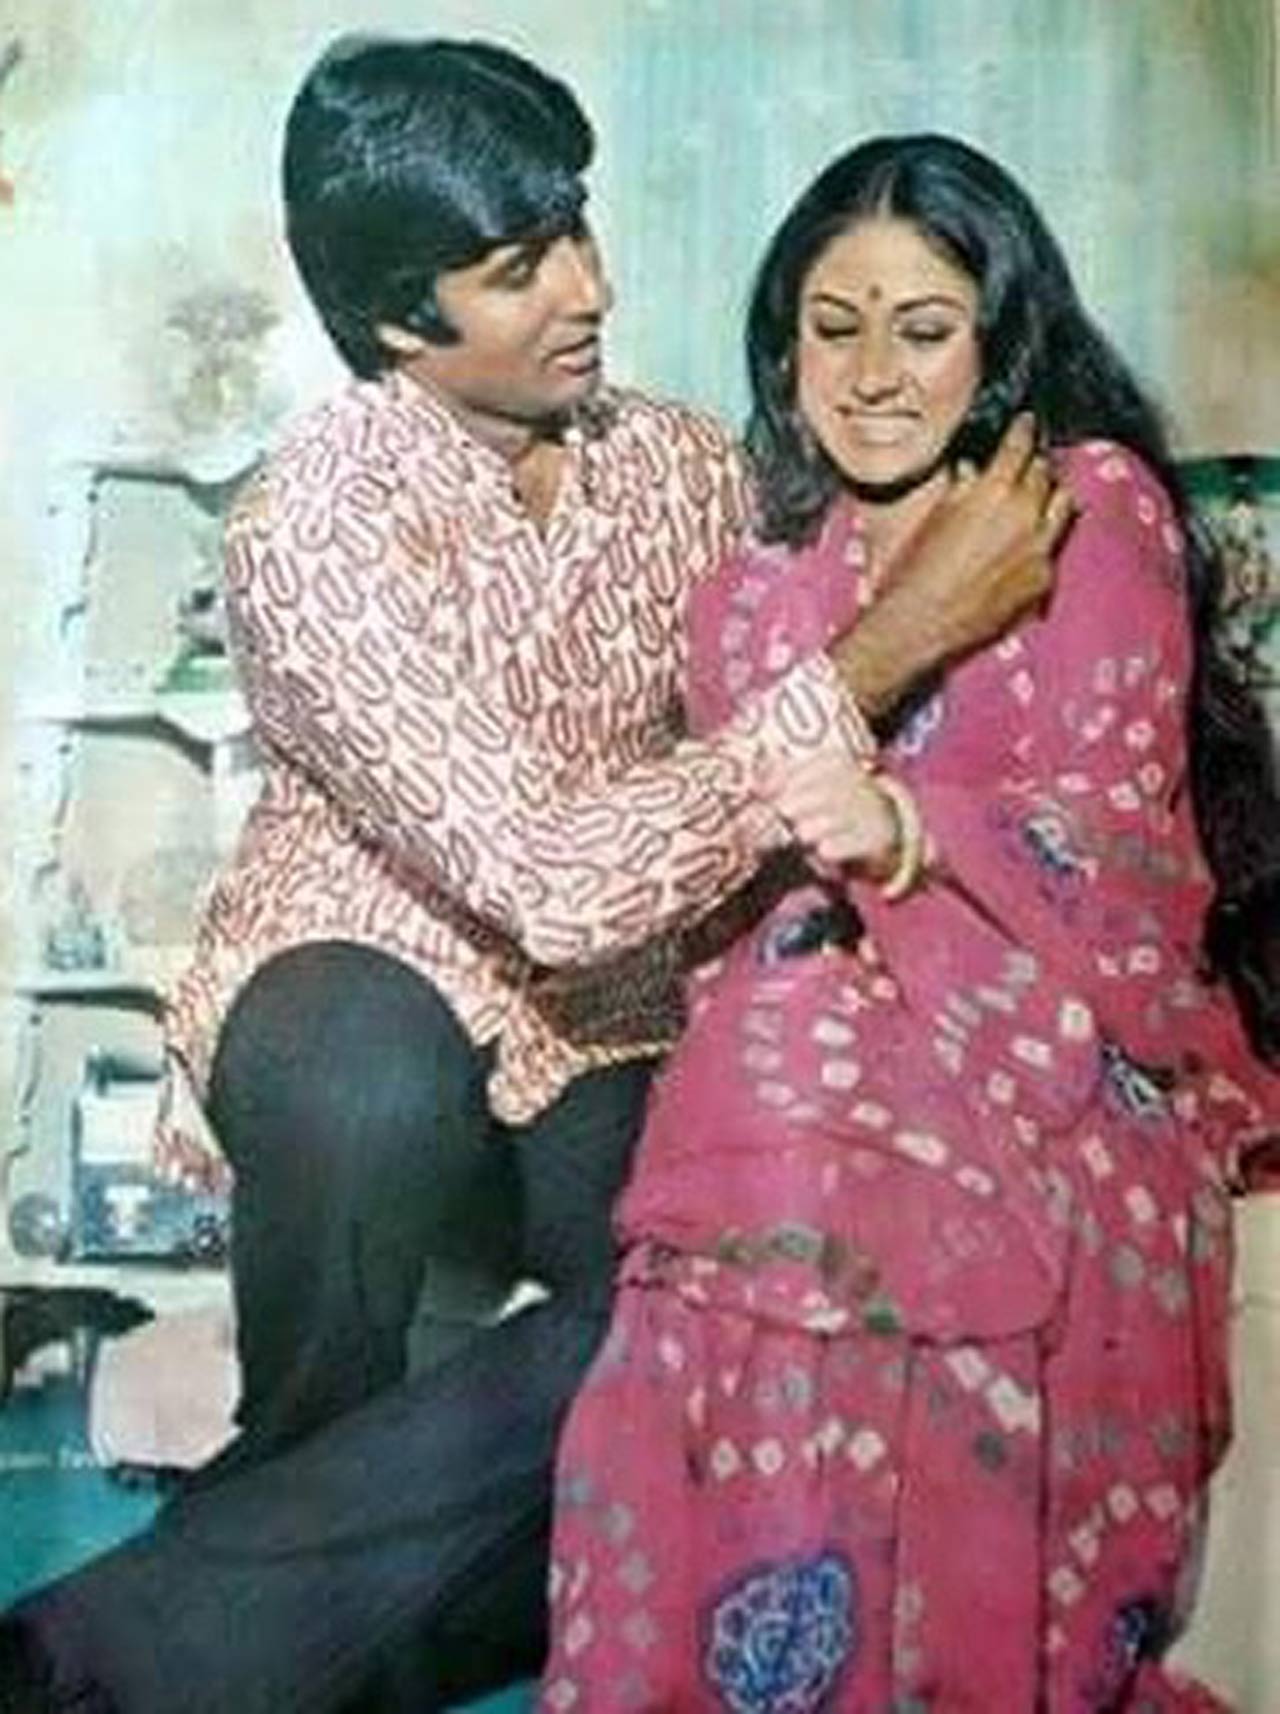 A classic throwback moment shared by Abhishek Bachchan that shows the golden era of Hindi Cinema featuring Amitabh Bachchan and Jaya Bachchan. This picture was shared by the 'Yuva' actor in 2016